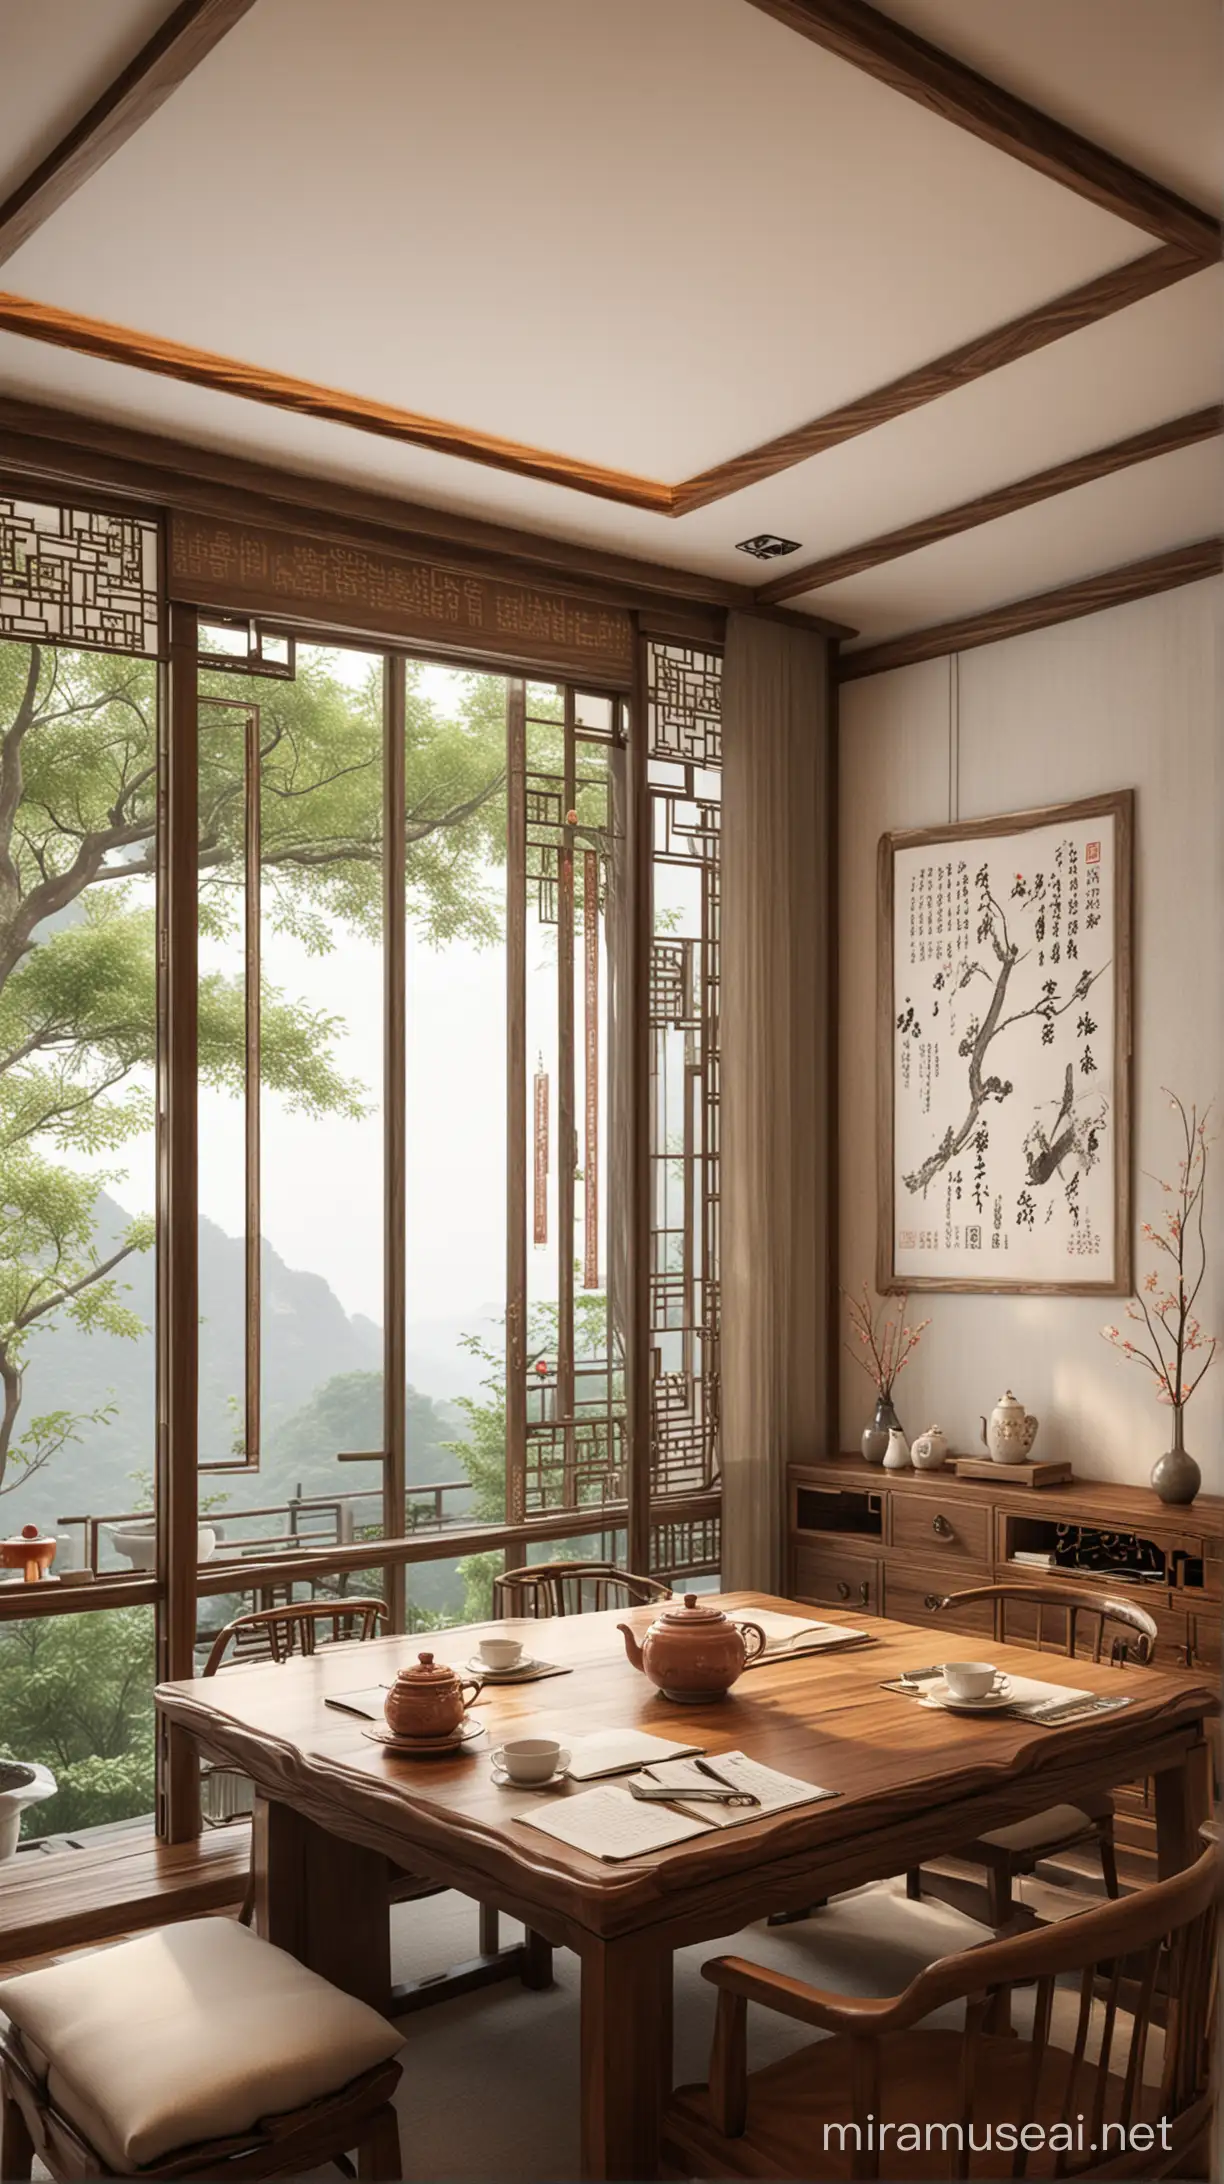 Chinese Tea Ceremony in a Stately Study Room